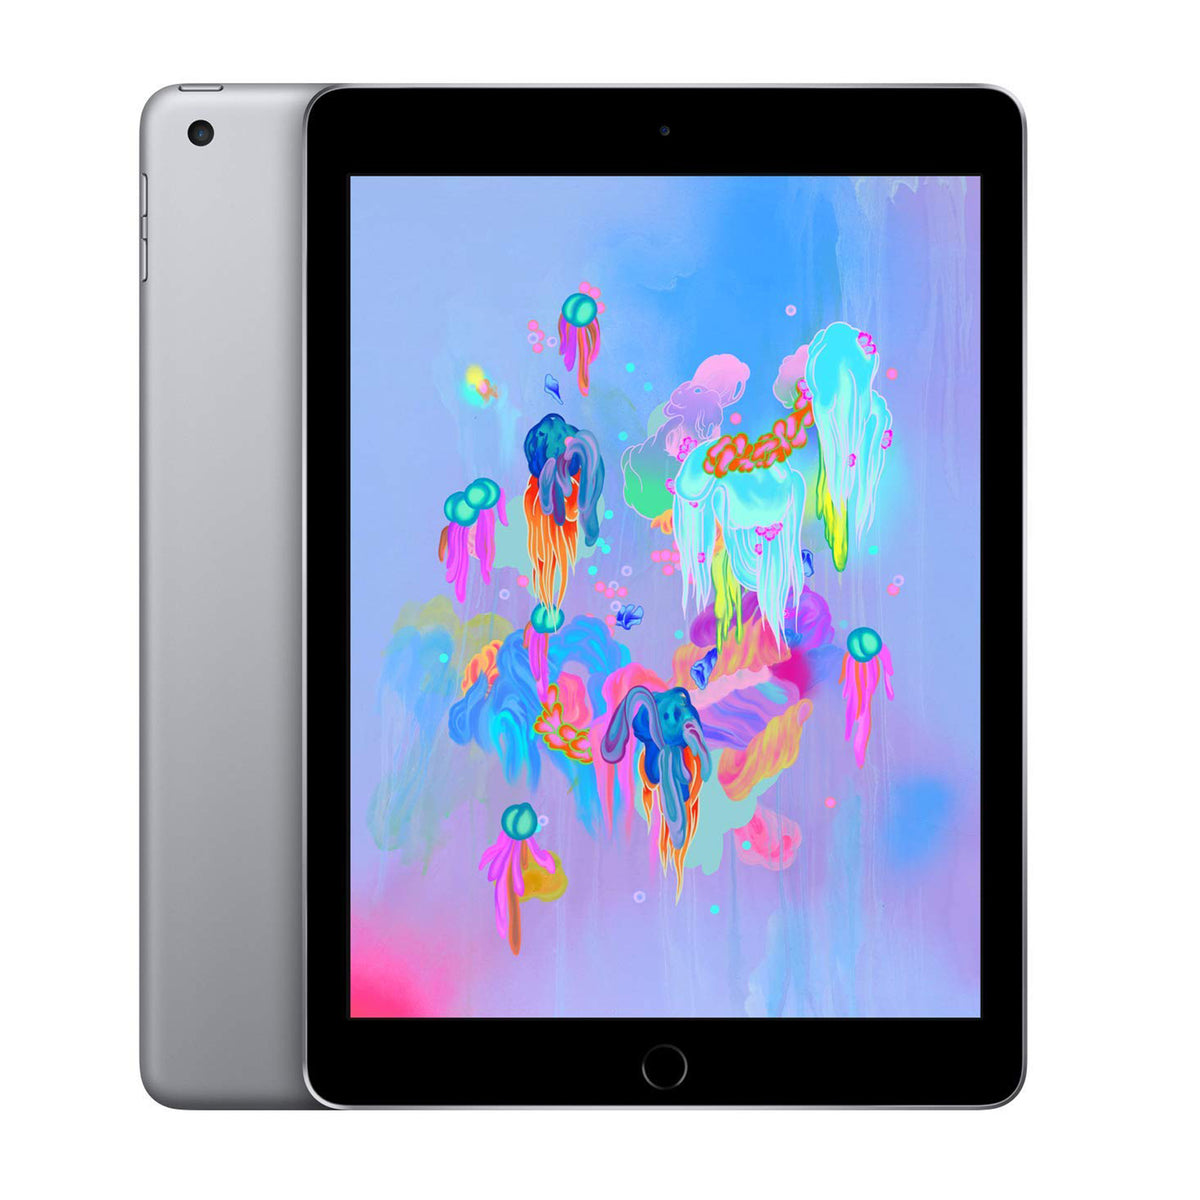 Get Apple iPad 6th Gen | Affordable and Reliable | Tech to School